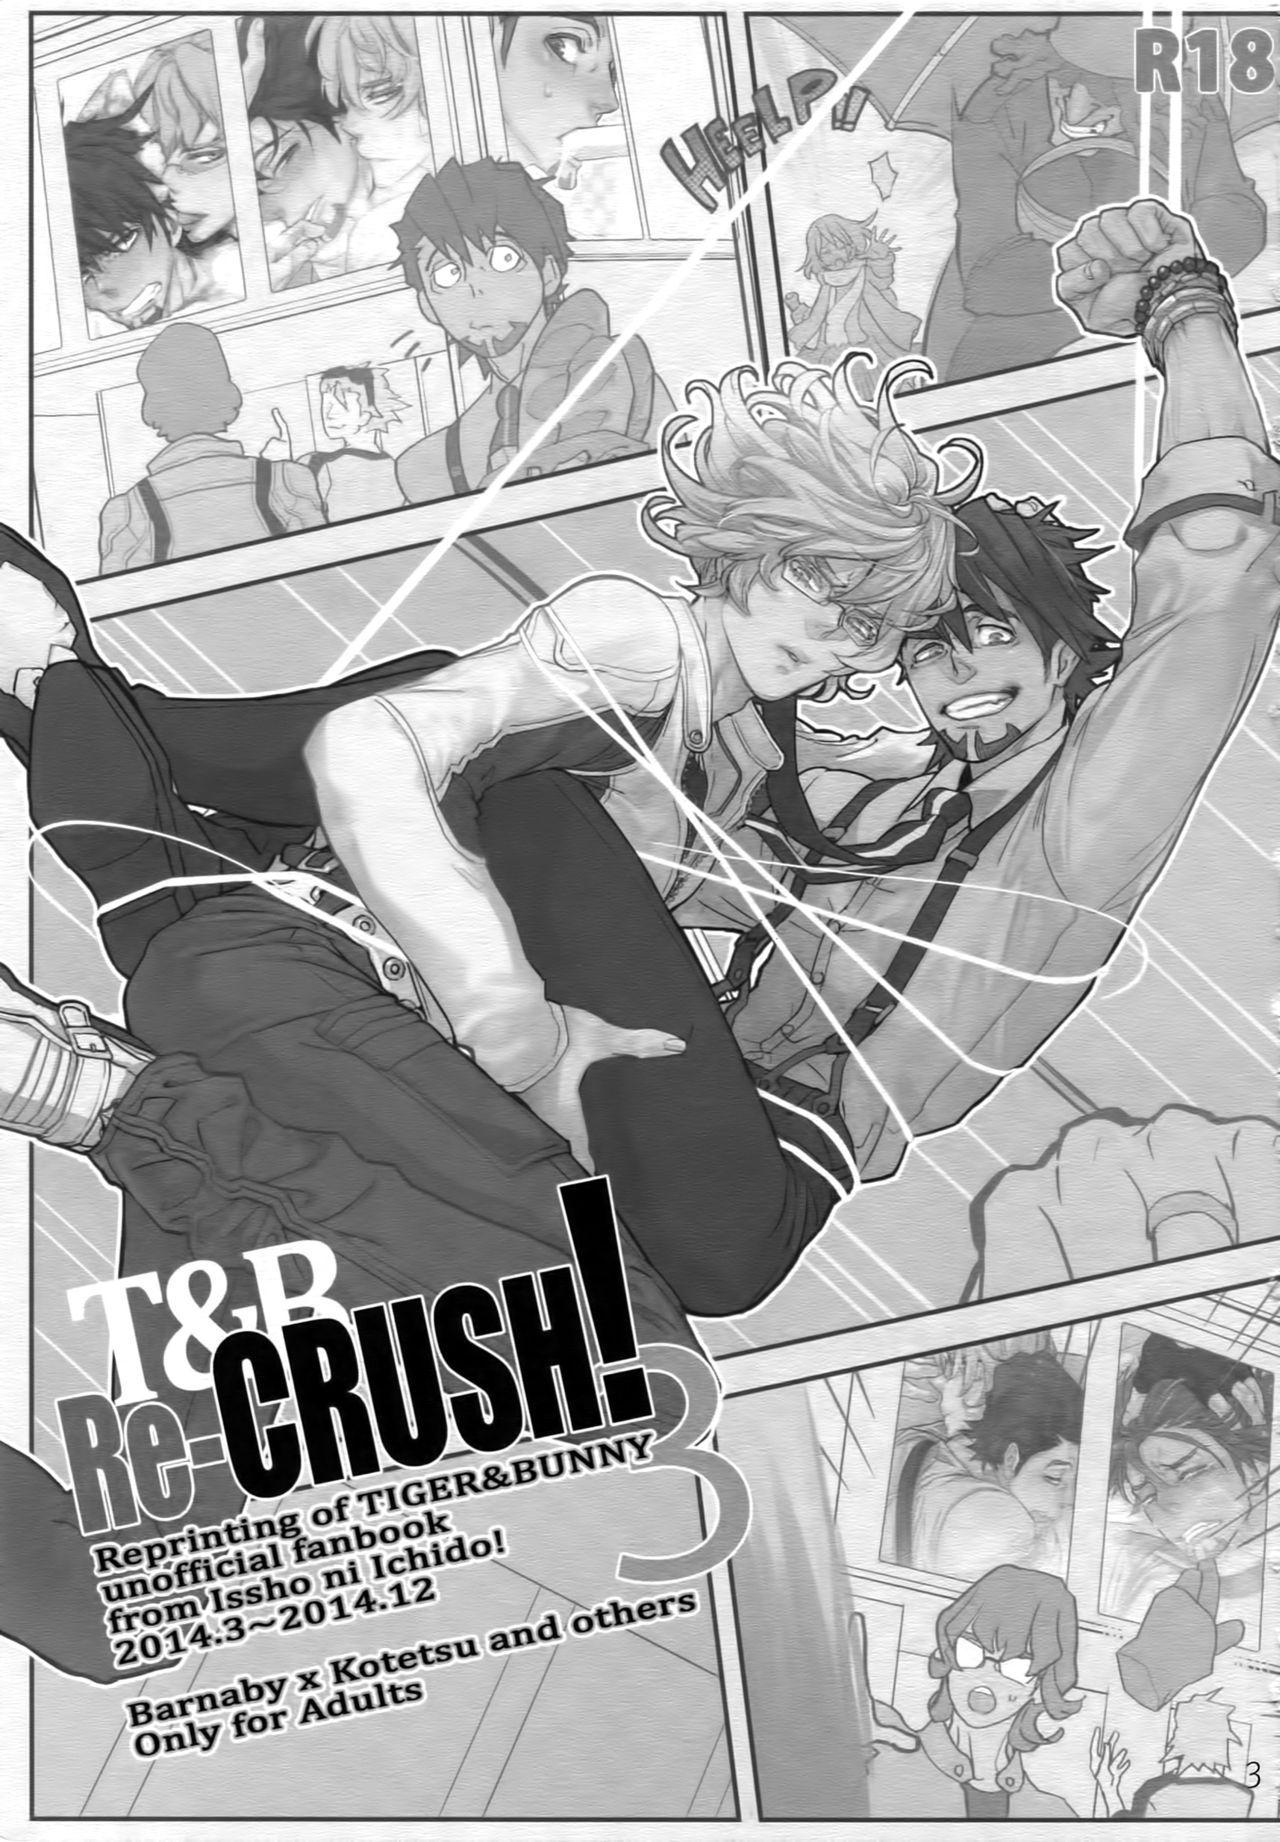 Lezbi T&B Re-CRUSH!3 - Tiger and bunny Bj - Page 2